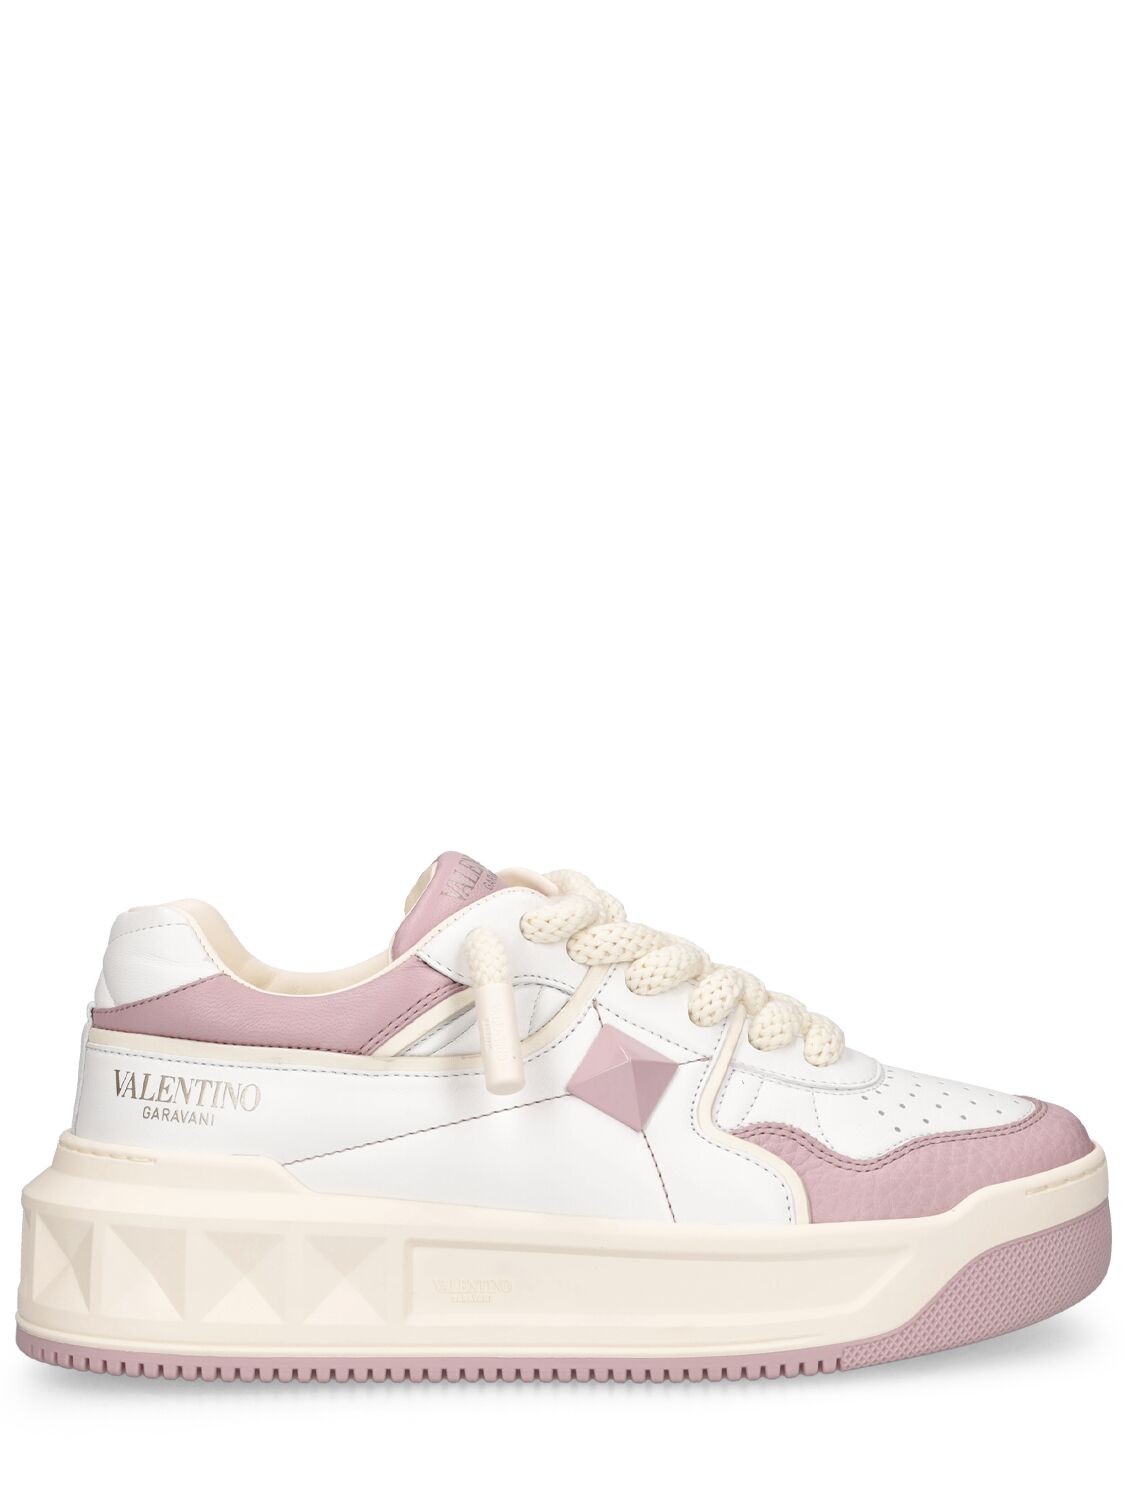 Valentino Garavani One Stud Xl Leather Sneakers In White,pink